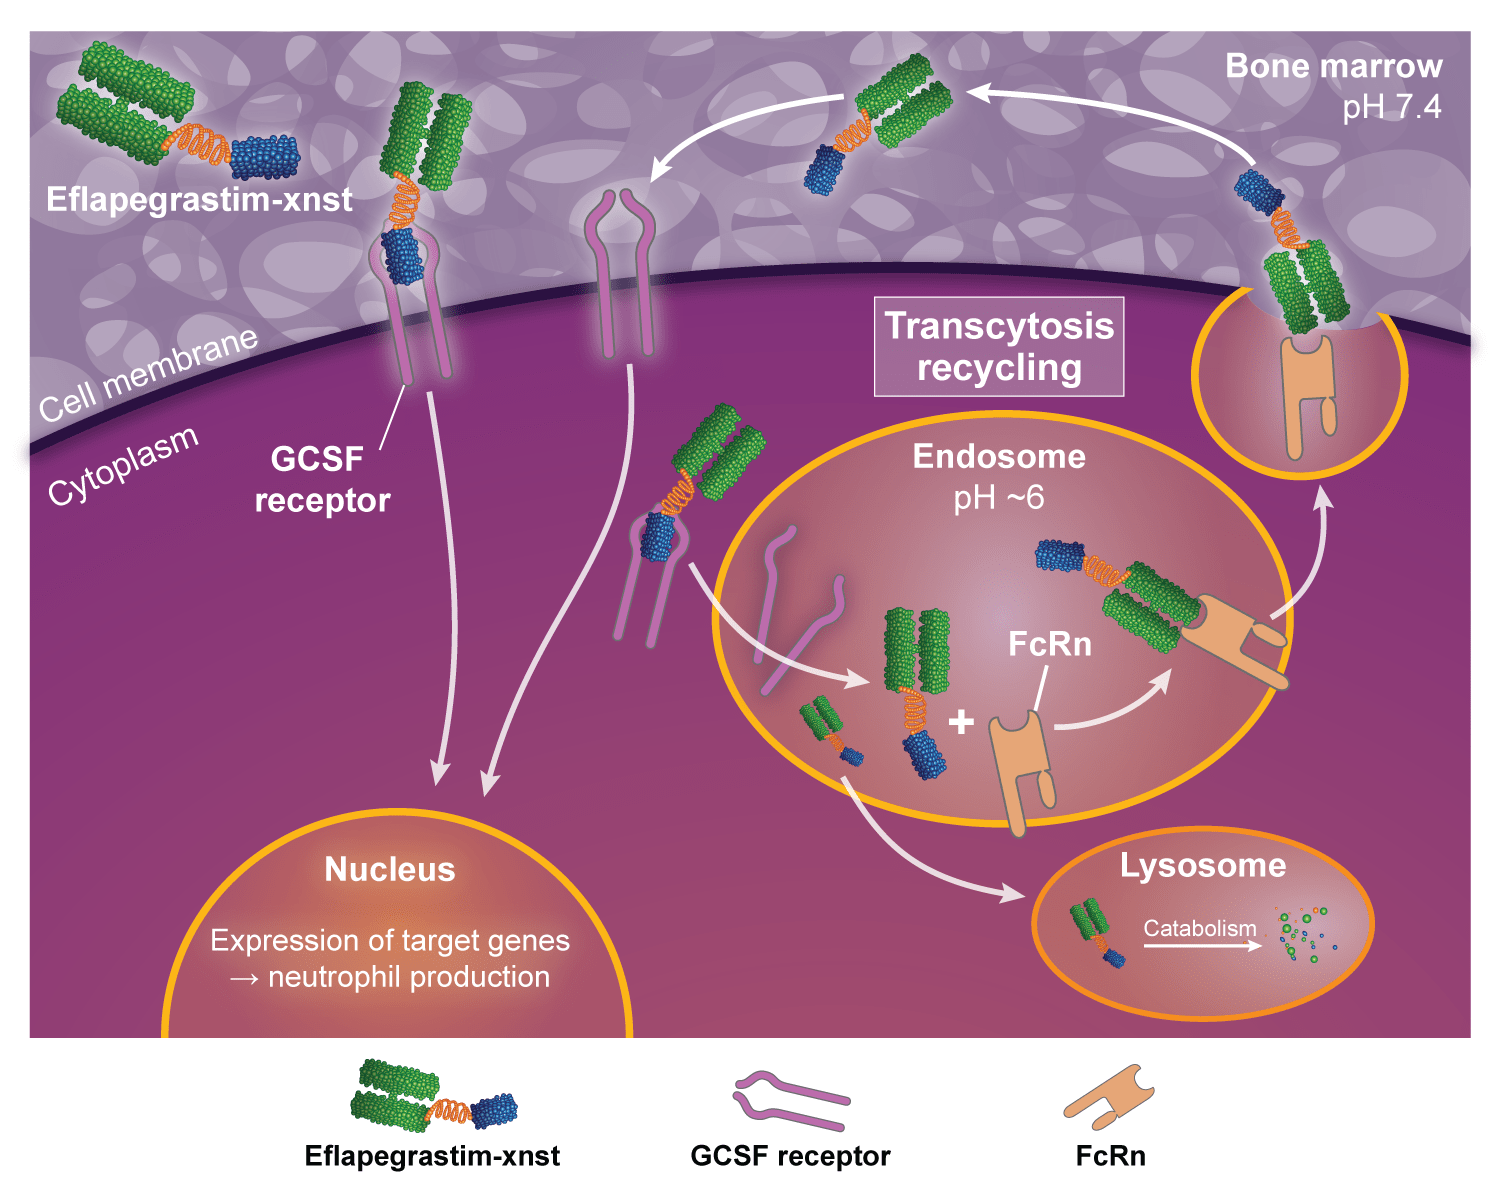 an illustration showing how rolvedon works within the body to combat severe neutropenia